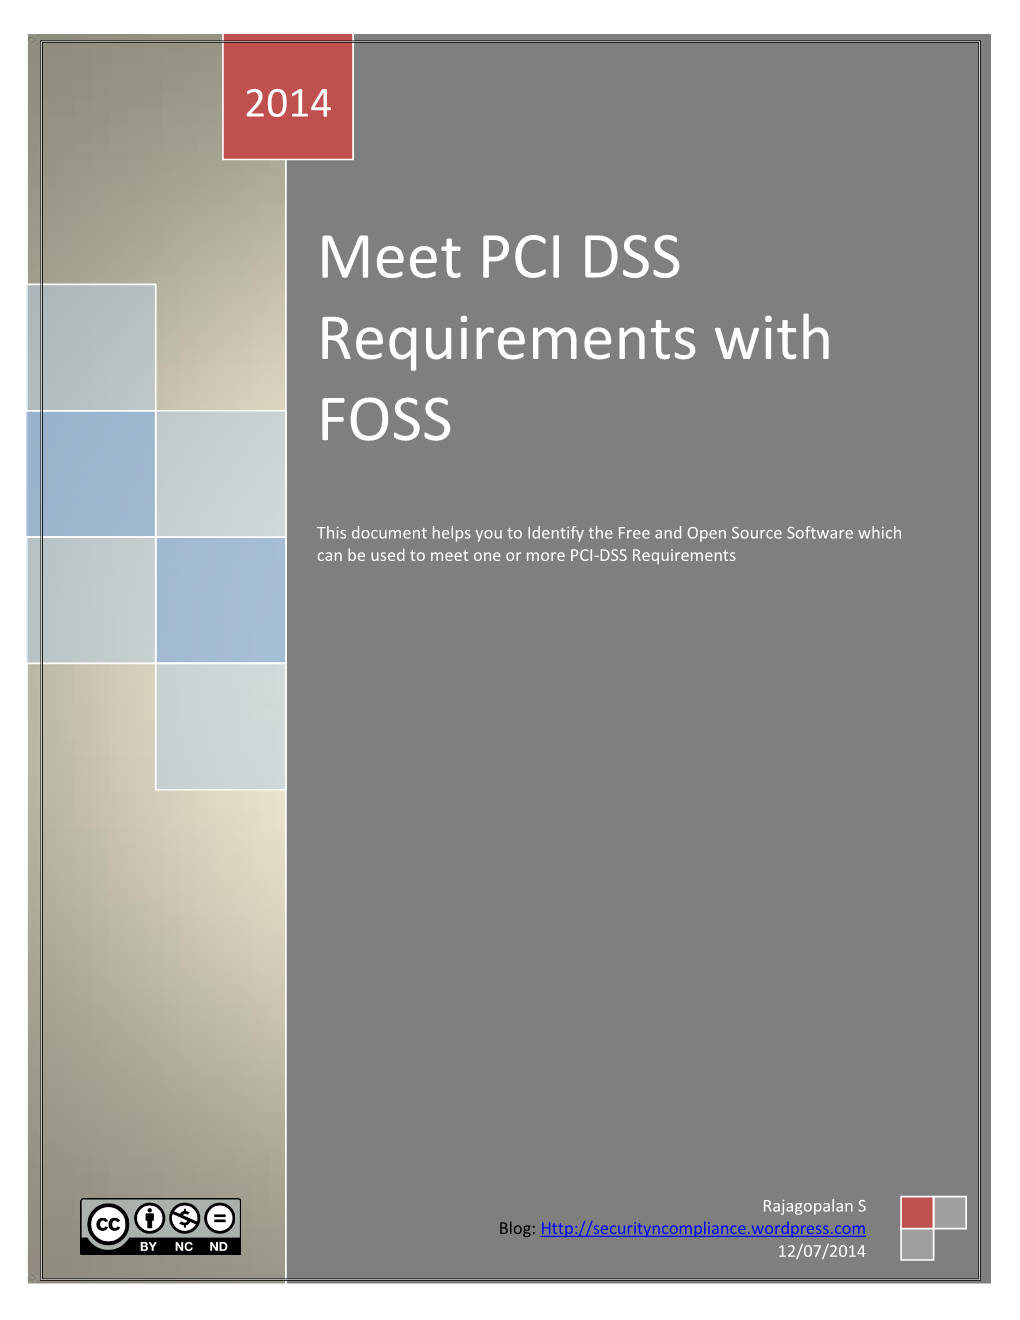 Meet PCI DSS Requirements with FOSS